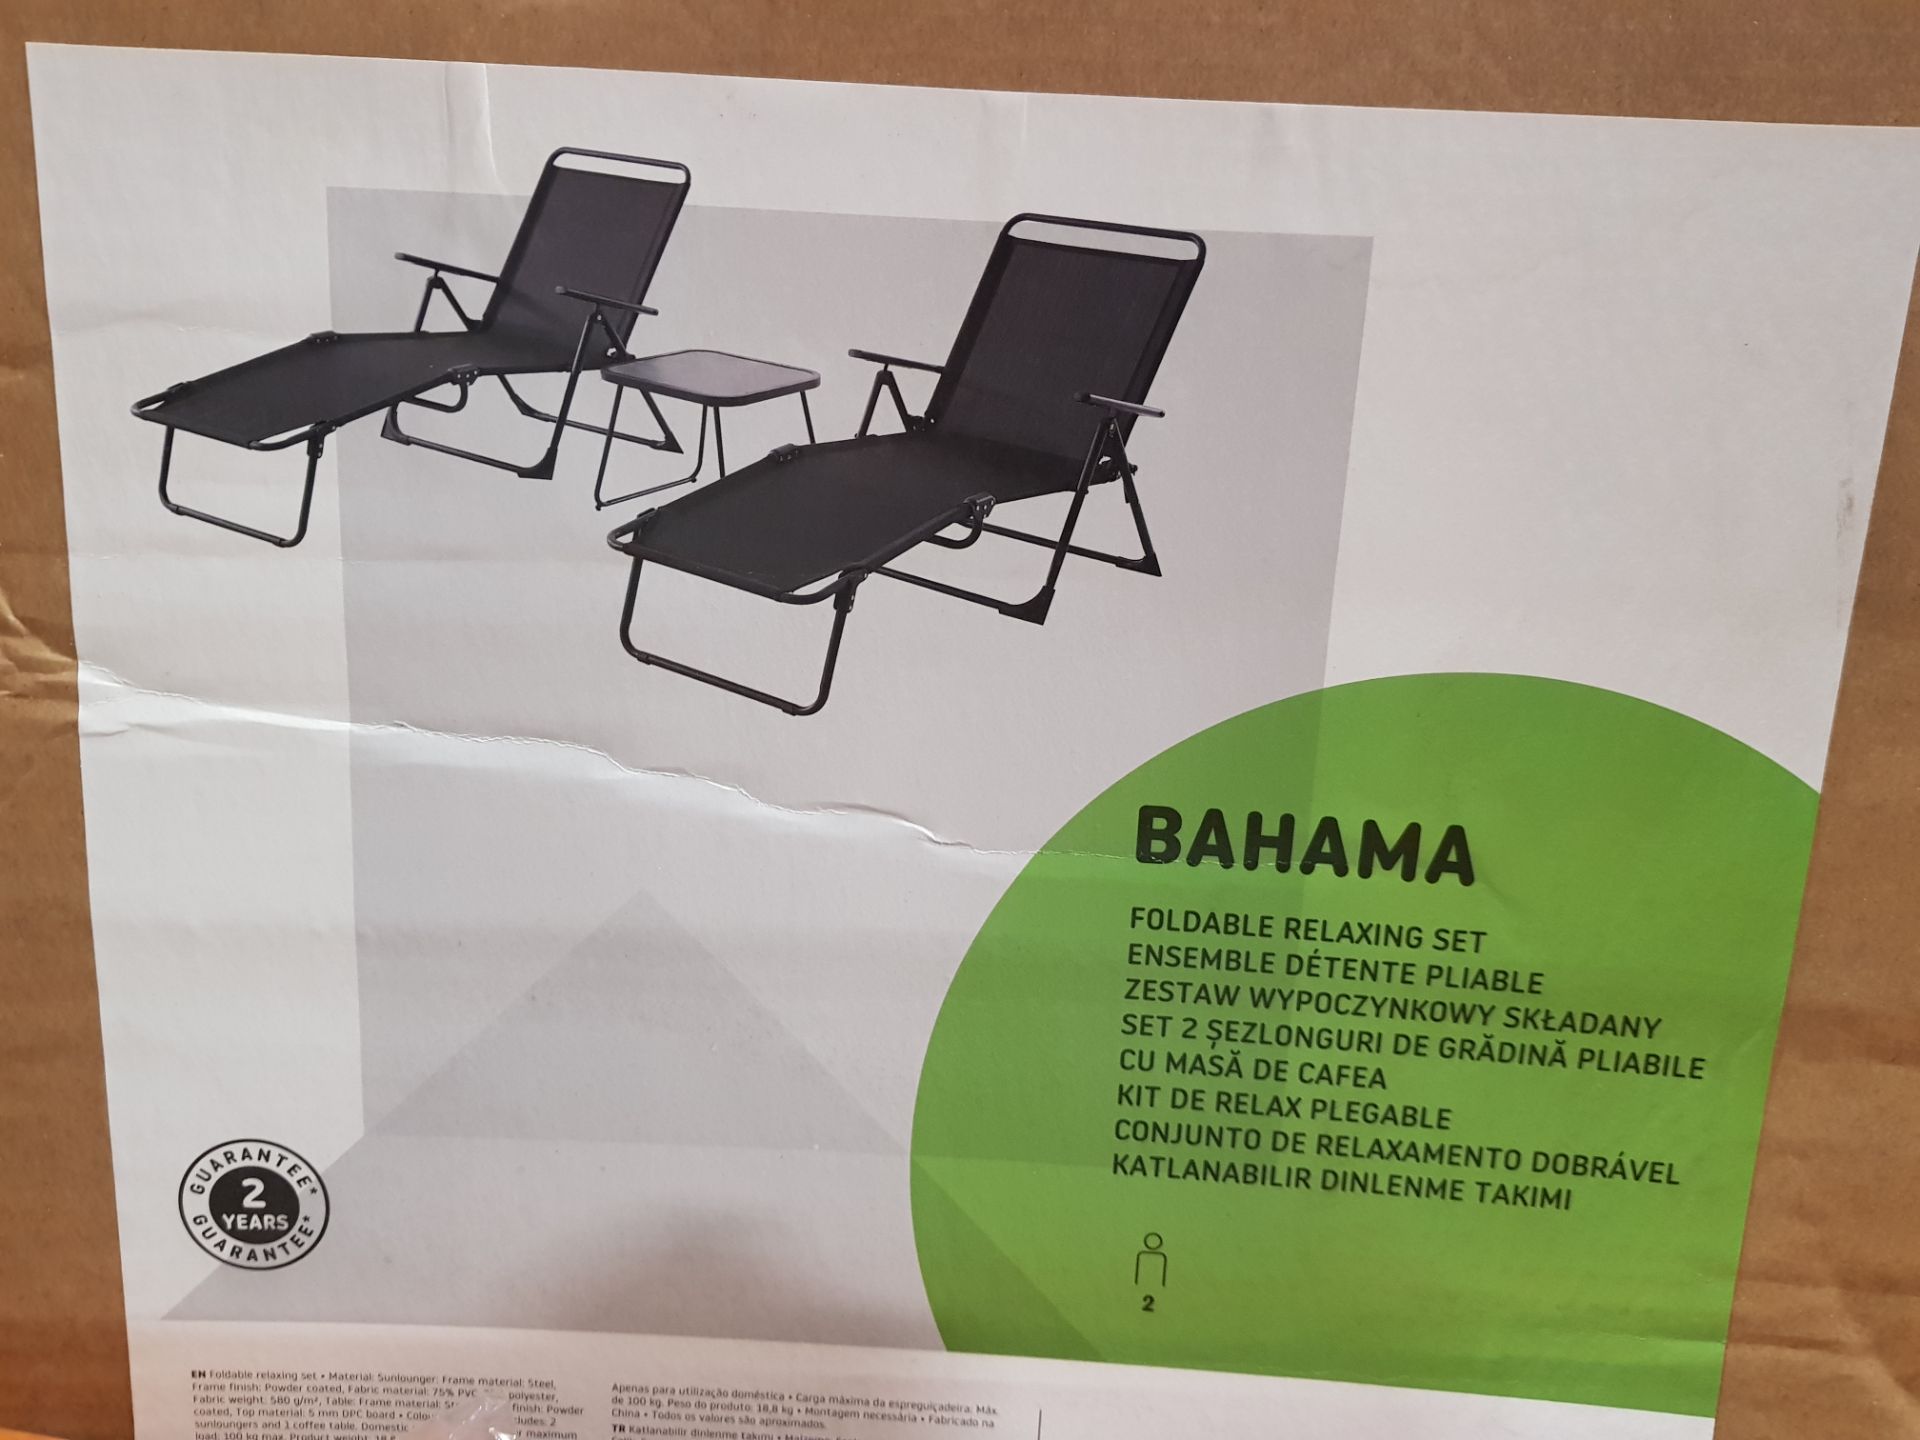 1 X BRAND NEW BAHAMA 2 SEATER FOLDABLE SUNLOUNGER AND COFFEE TABLE SET - IN BLACK COLOUR - IN 1 BOX - Image 2 of 2